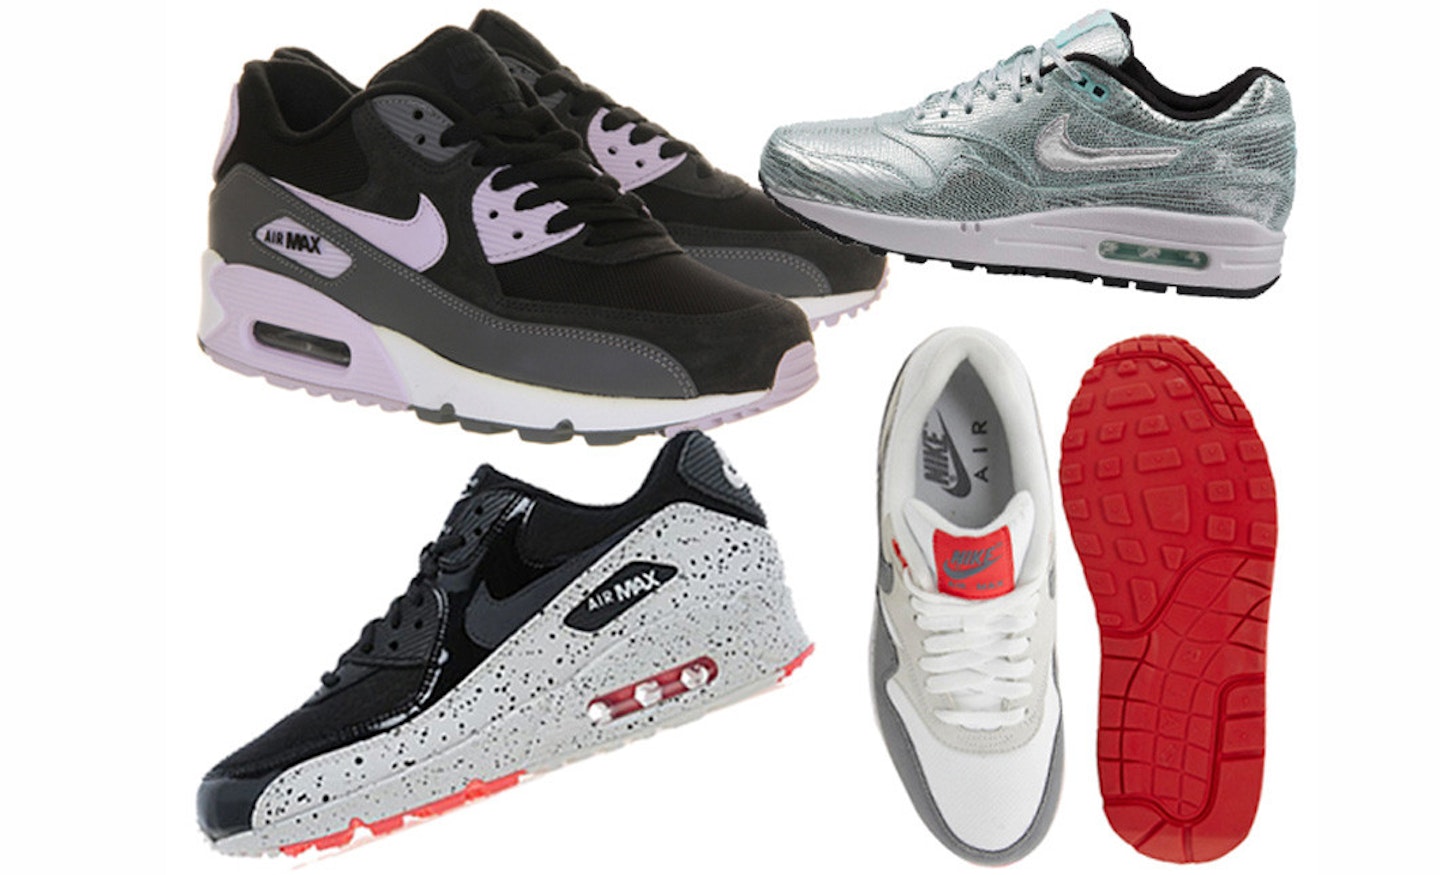 Our faves that you can buy now to celebrate, clockwise from top left: Lilac & Grey, £96.99 at Office; Metallic aquamarine, £139 at Nike Grey & red, £95 at Asos; Speckled grey, £95 at JD Sports.